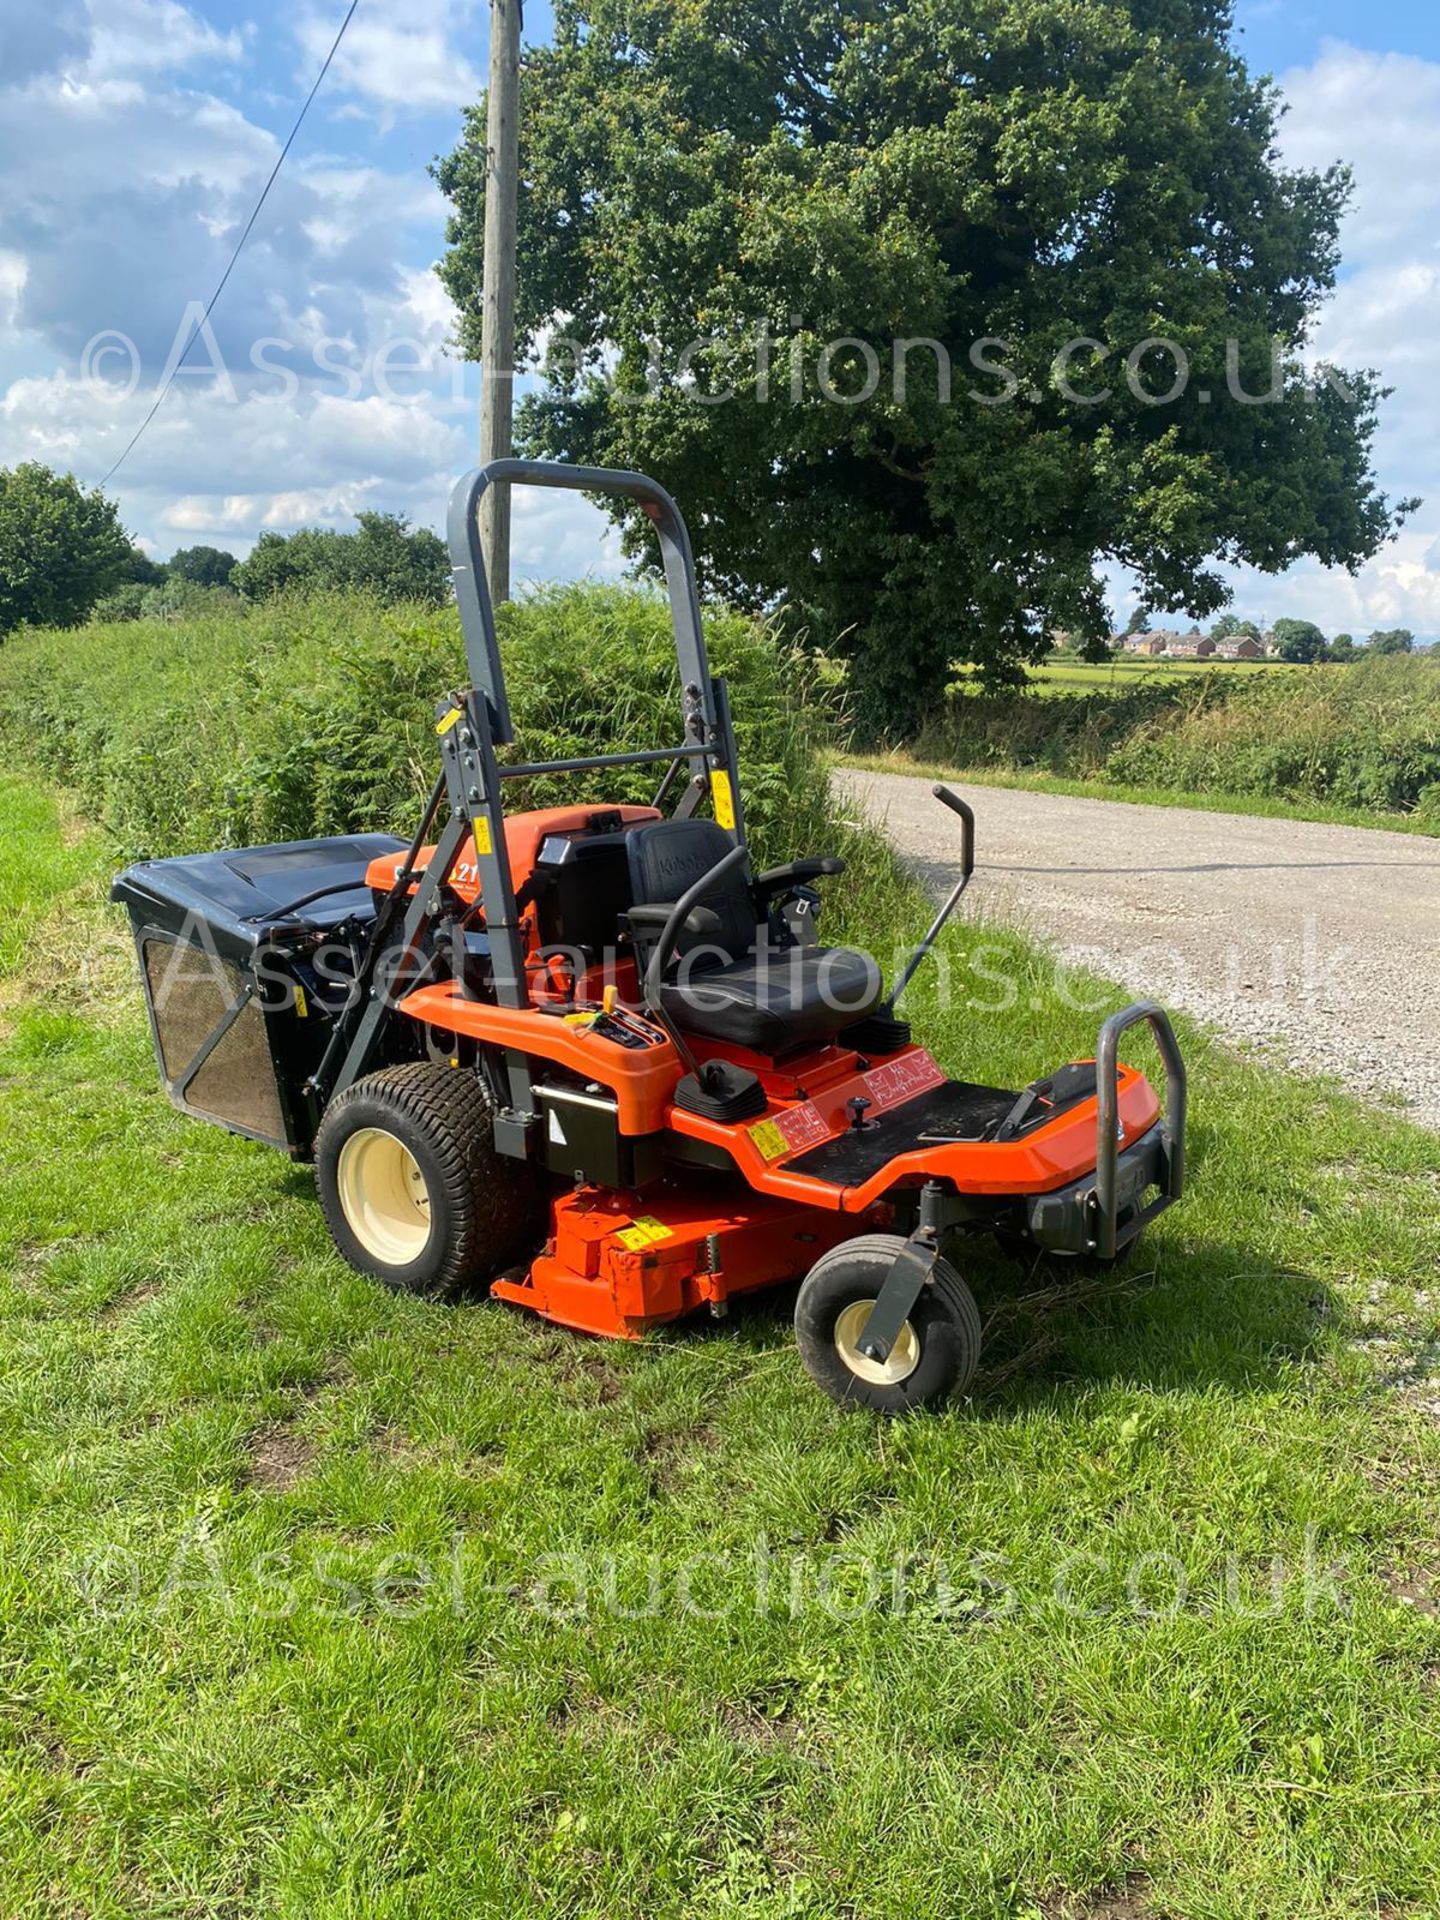 2015 KUBOTA GZD21 HIGH TIP ZERO TURN MOWER, SOLD NEW MID 2017, SHOWING A LOW 203 HOURS *PLUS VAT*